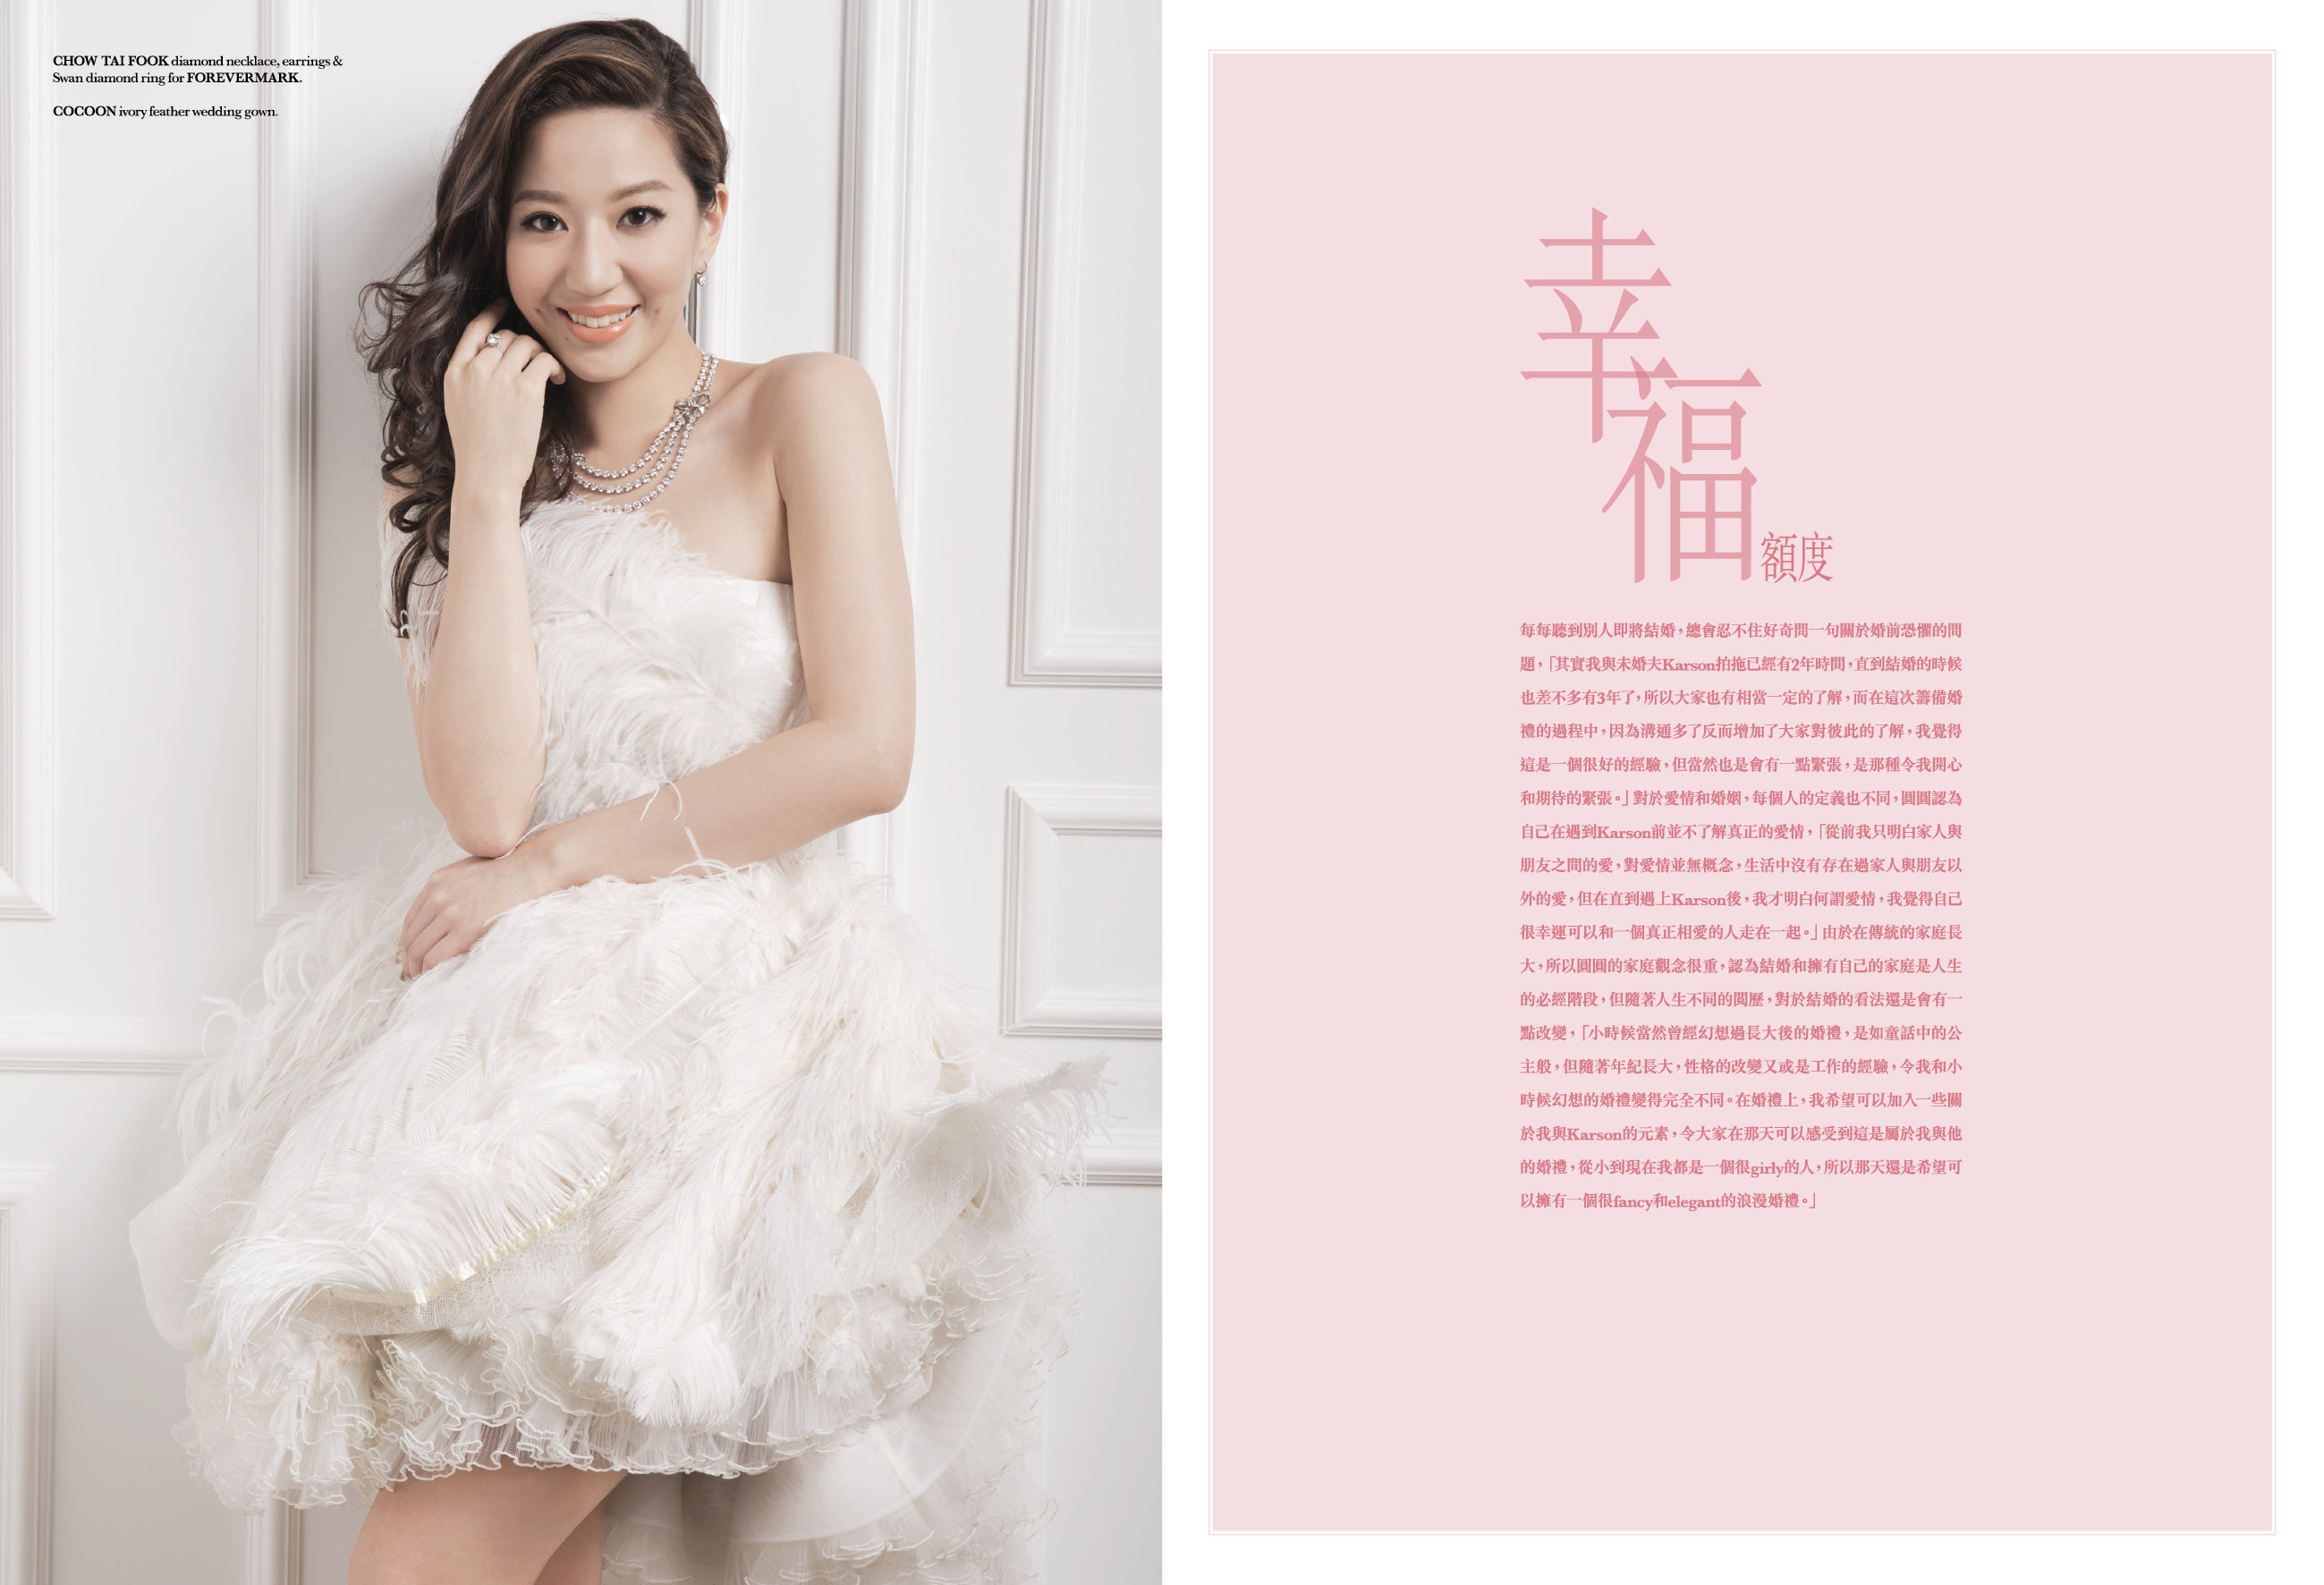 169-wedding cover story2